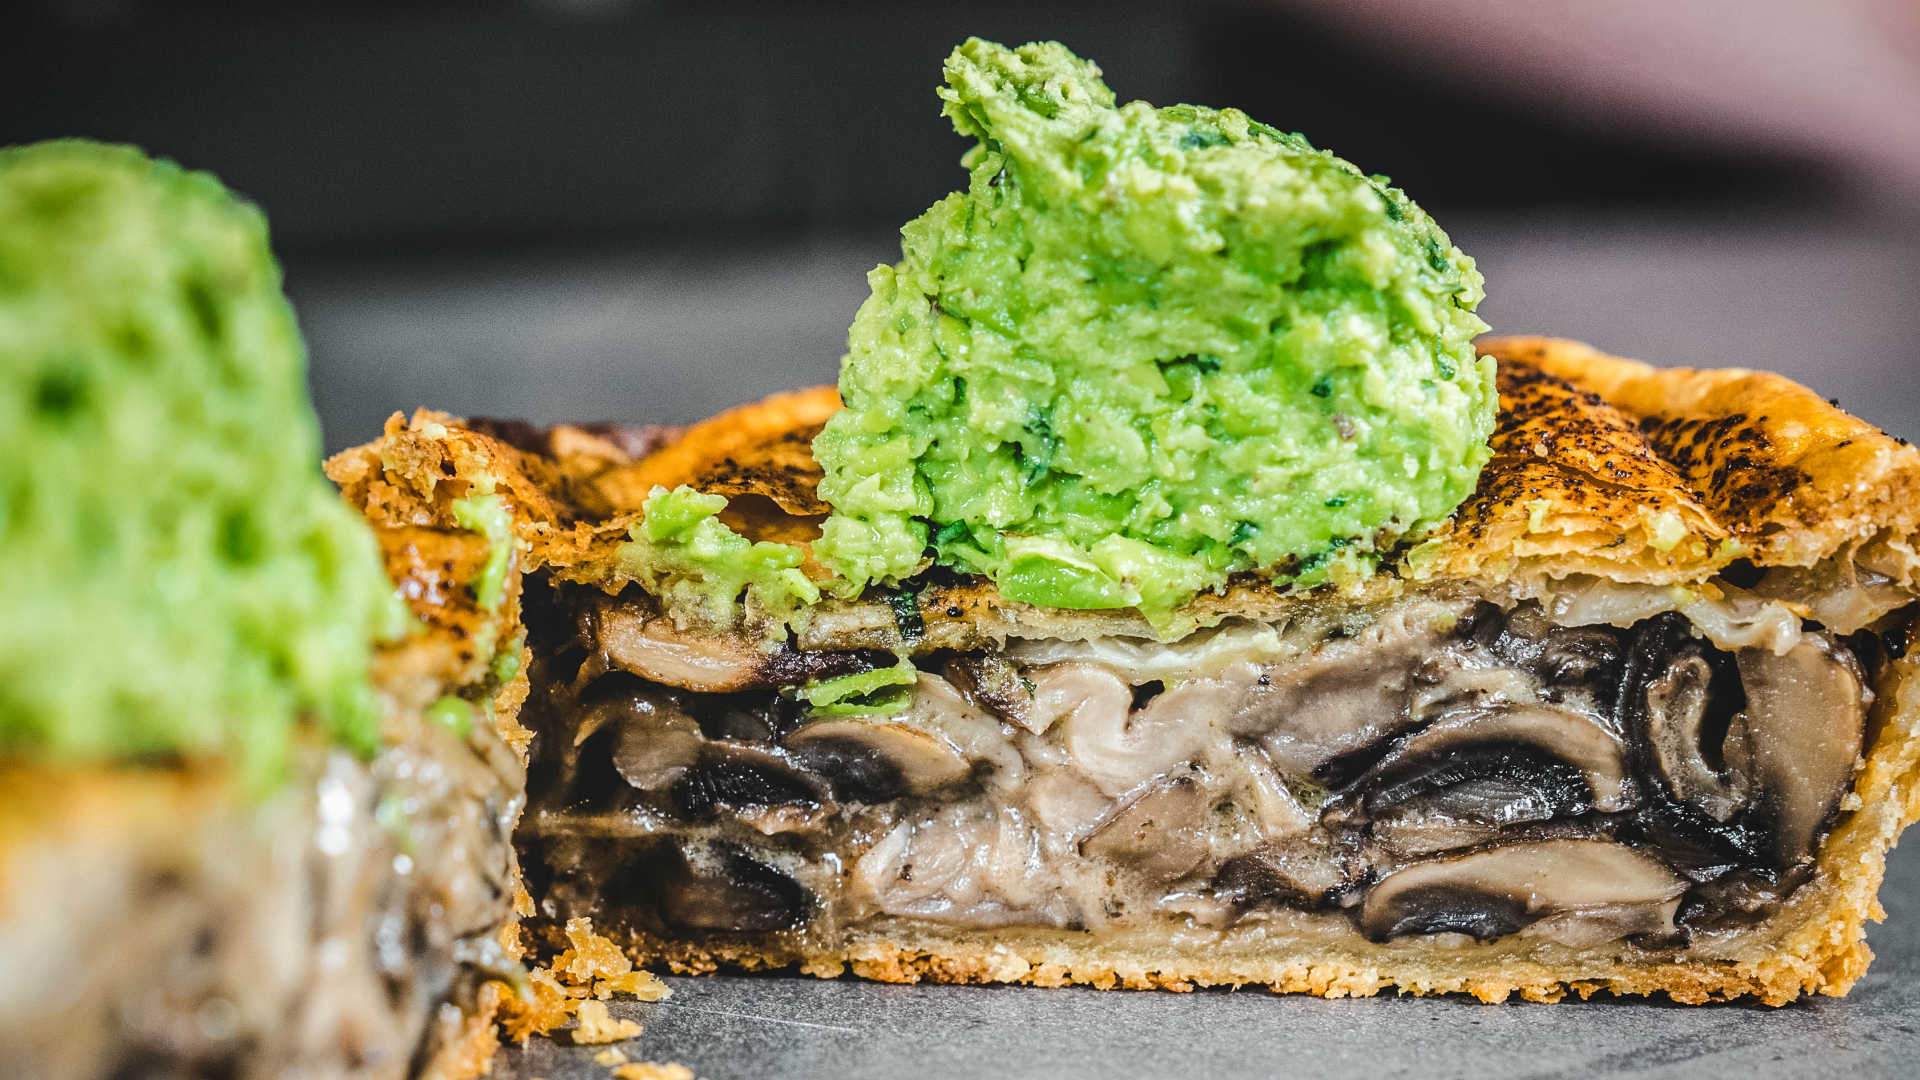 Gelato Messina Is Opening a One-Day Pop-Up Pie Shop